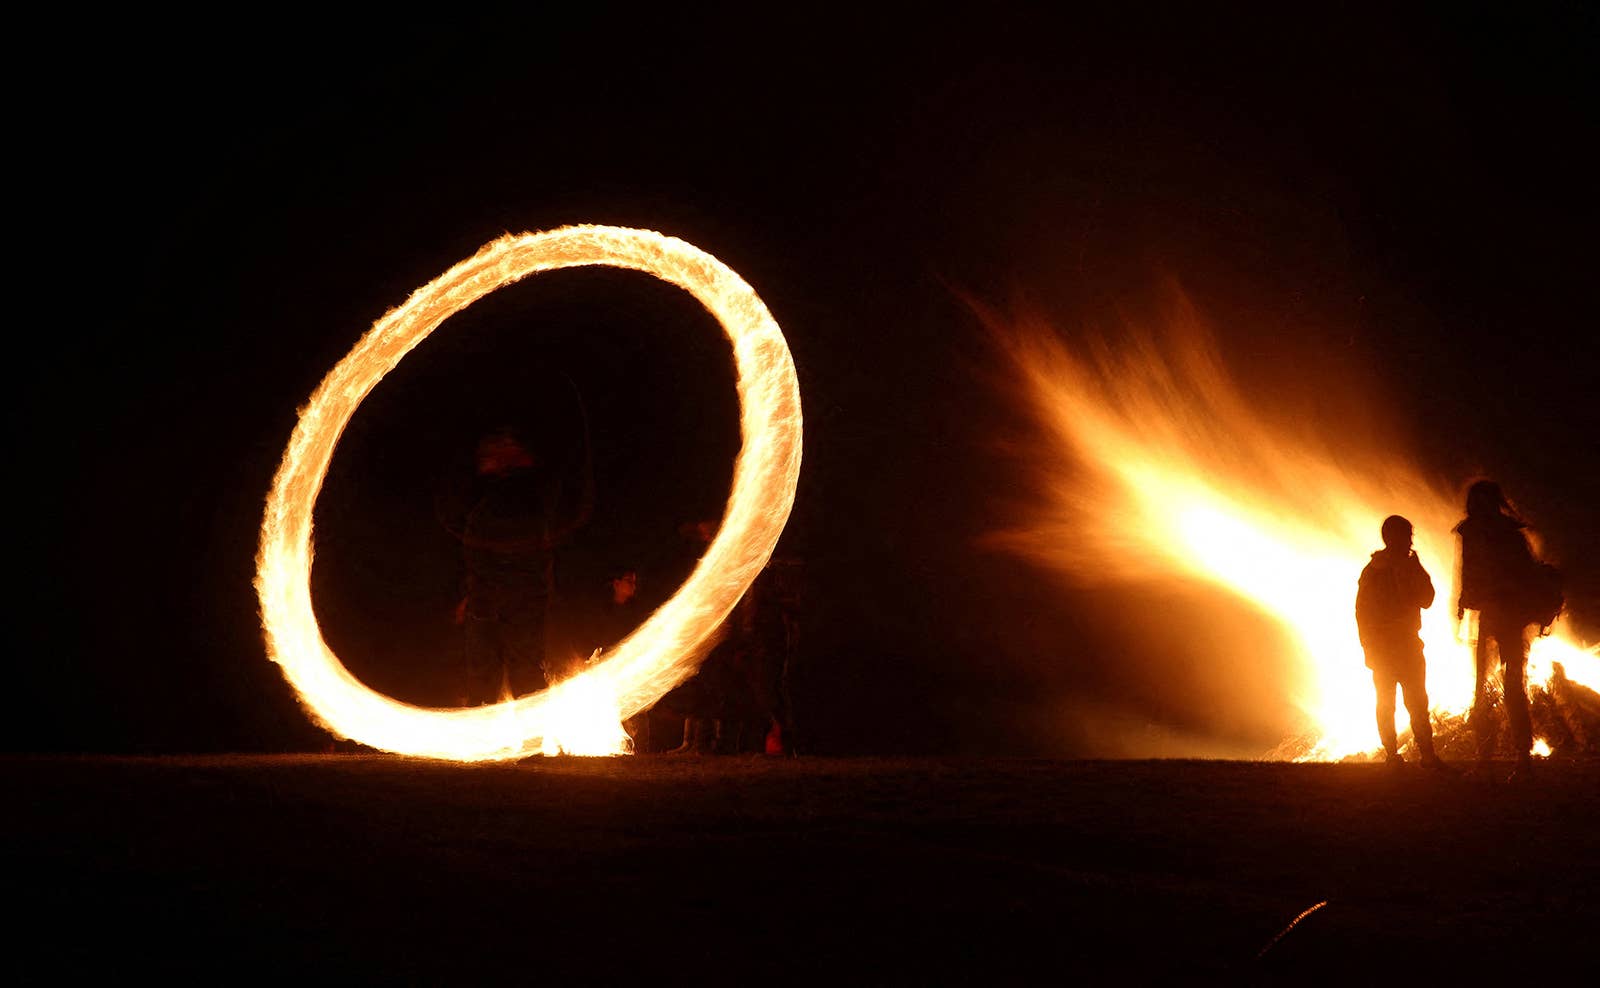 A long-exposure photo showing a ring of fire being spun around someone standing, while two figures are silhouetted by a bonfire to the right in the frame